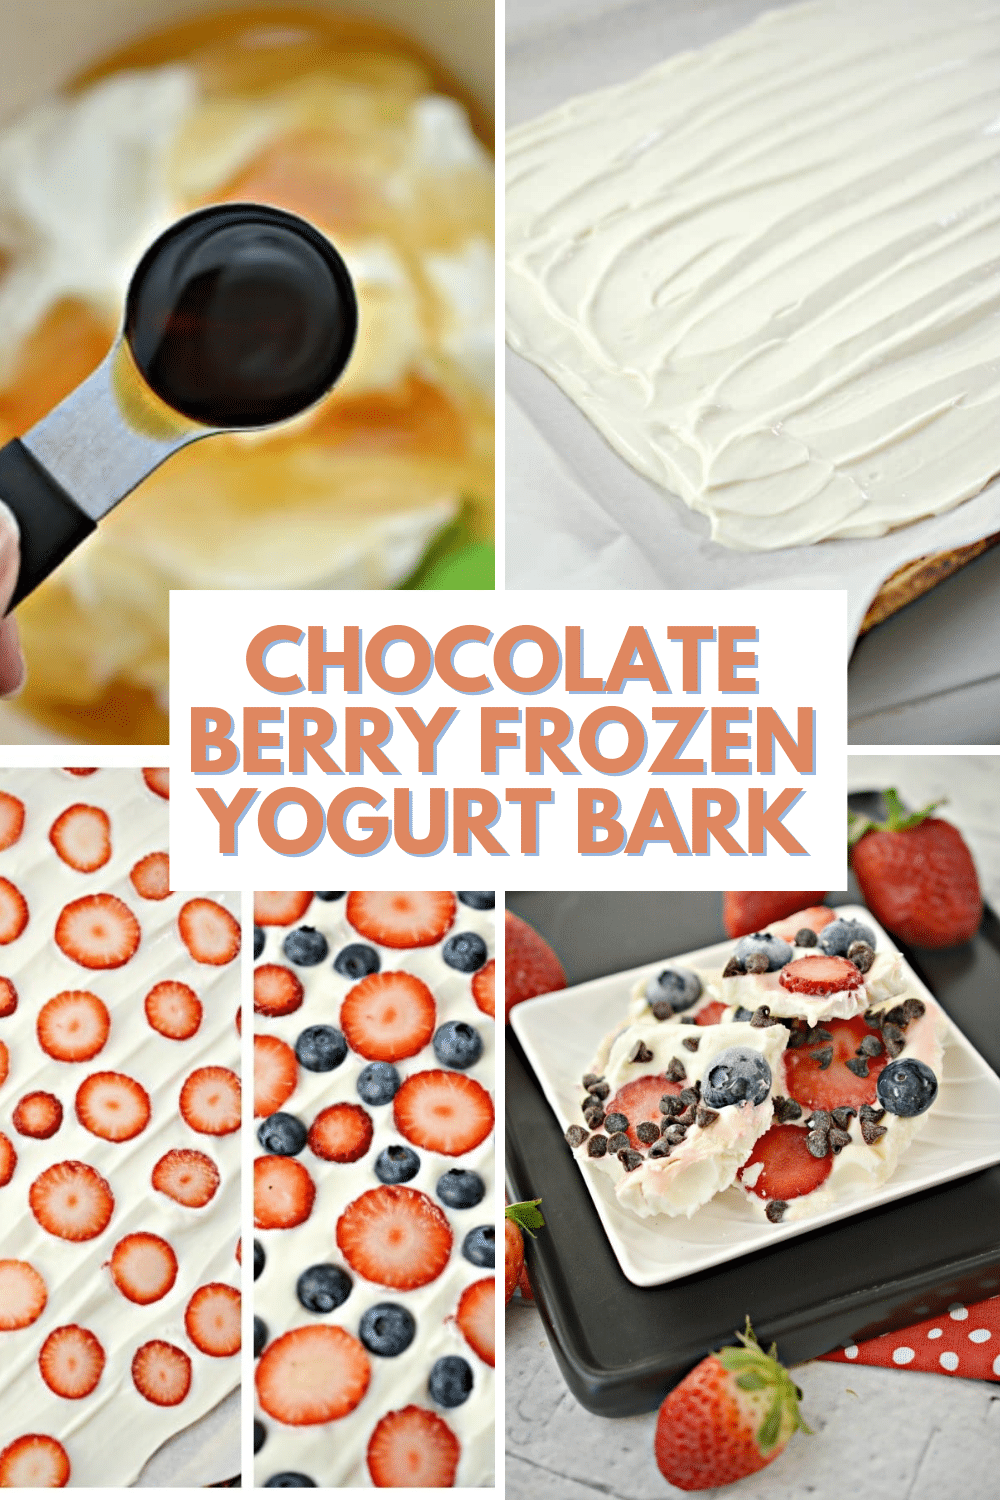 Chocolate Berry Frozen Yogurt Bark is a simple no bake dessert recipe with only 6 ingredients. This delicious treat is also a healthier option for dessert. #yogurt #greekyogurt #fruit #dessert via @wondermomwannab